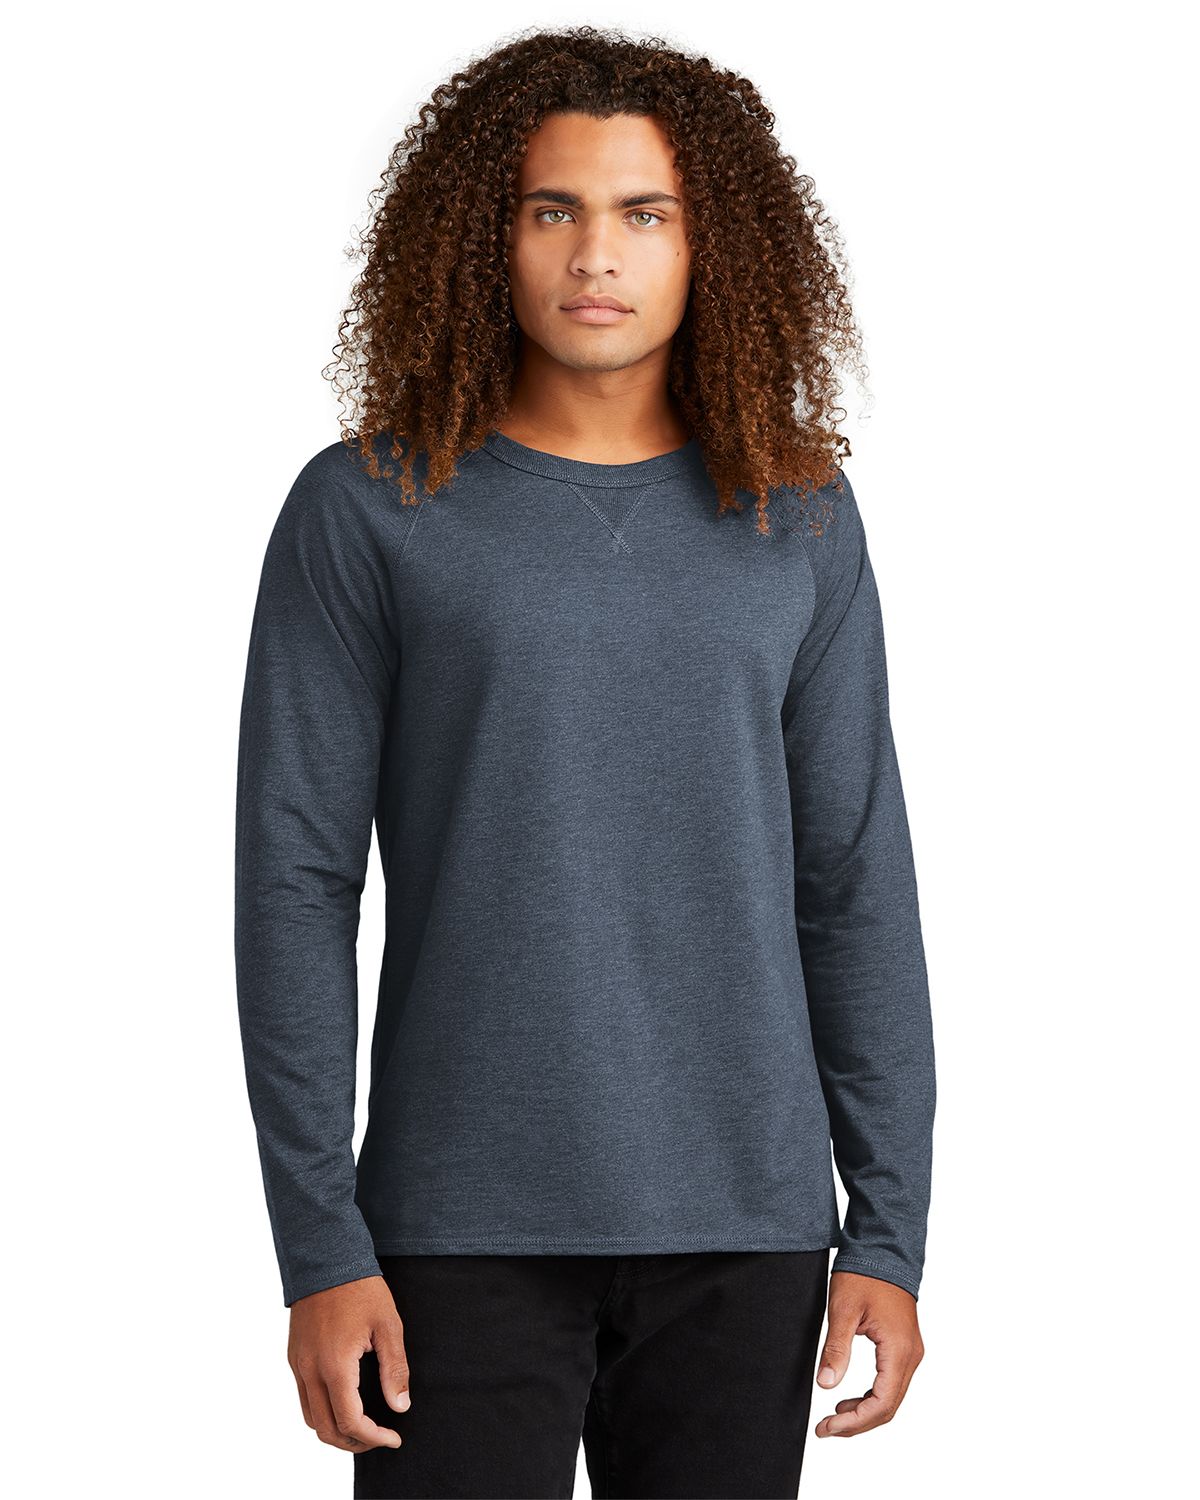 District DT572 Men's Featherweight French Terry Long Sleeve Crewneck